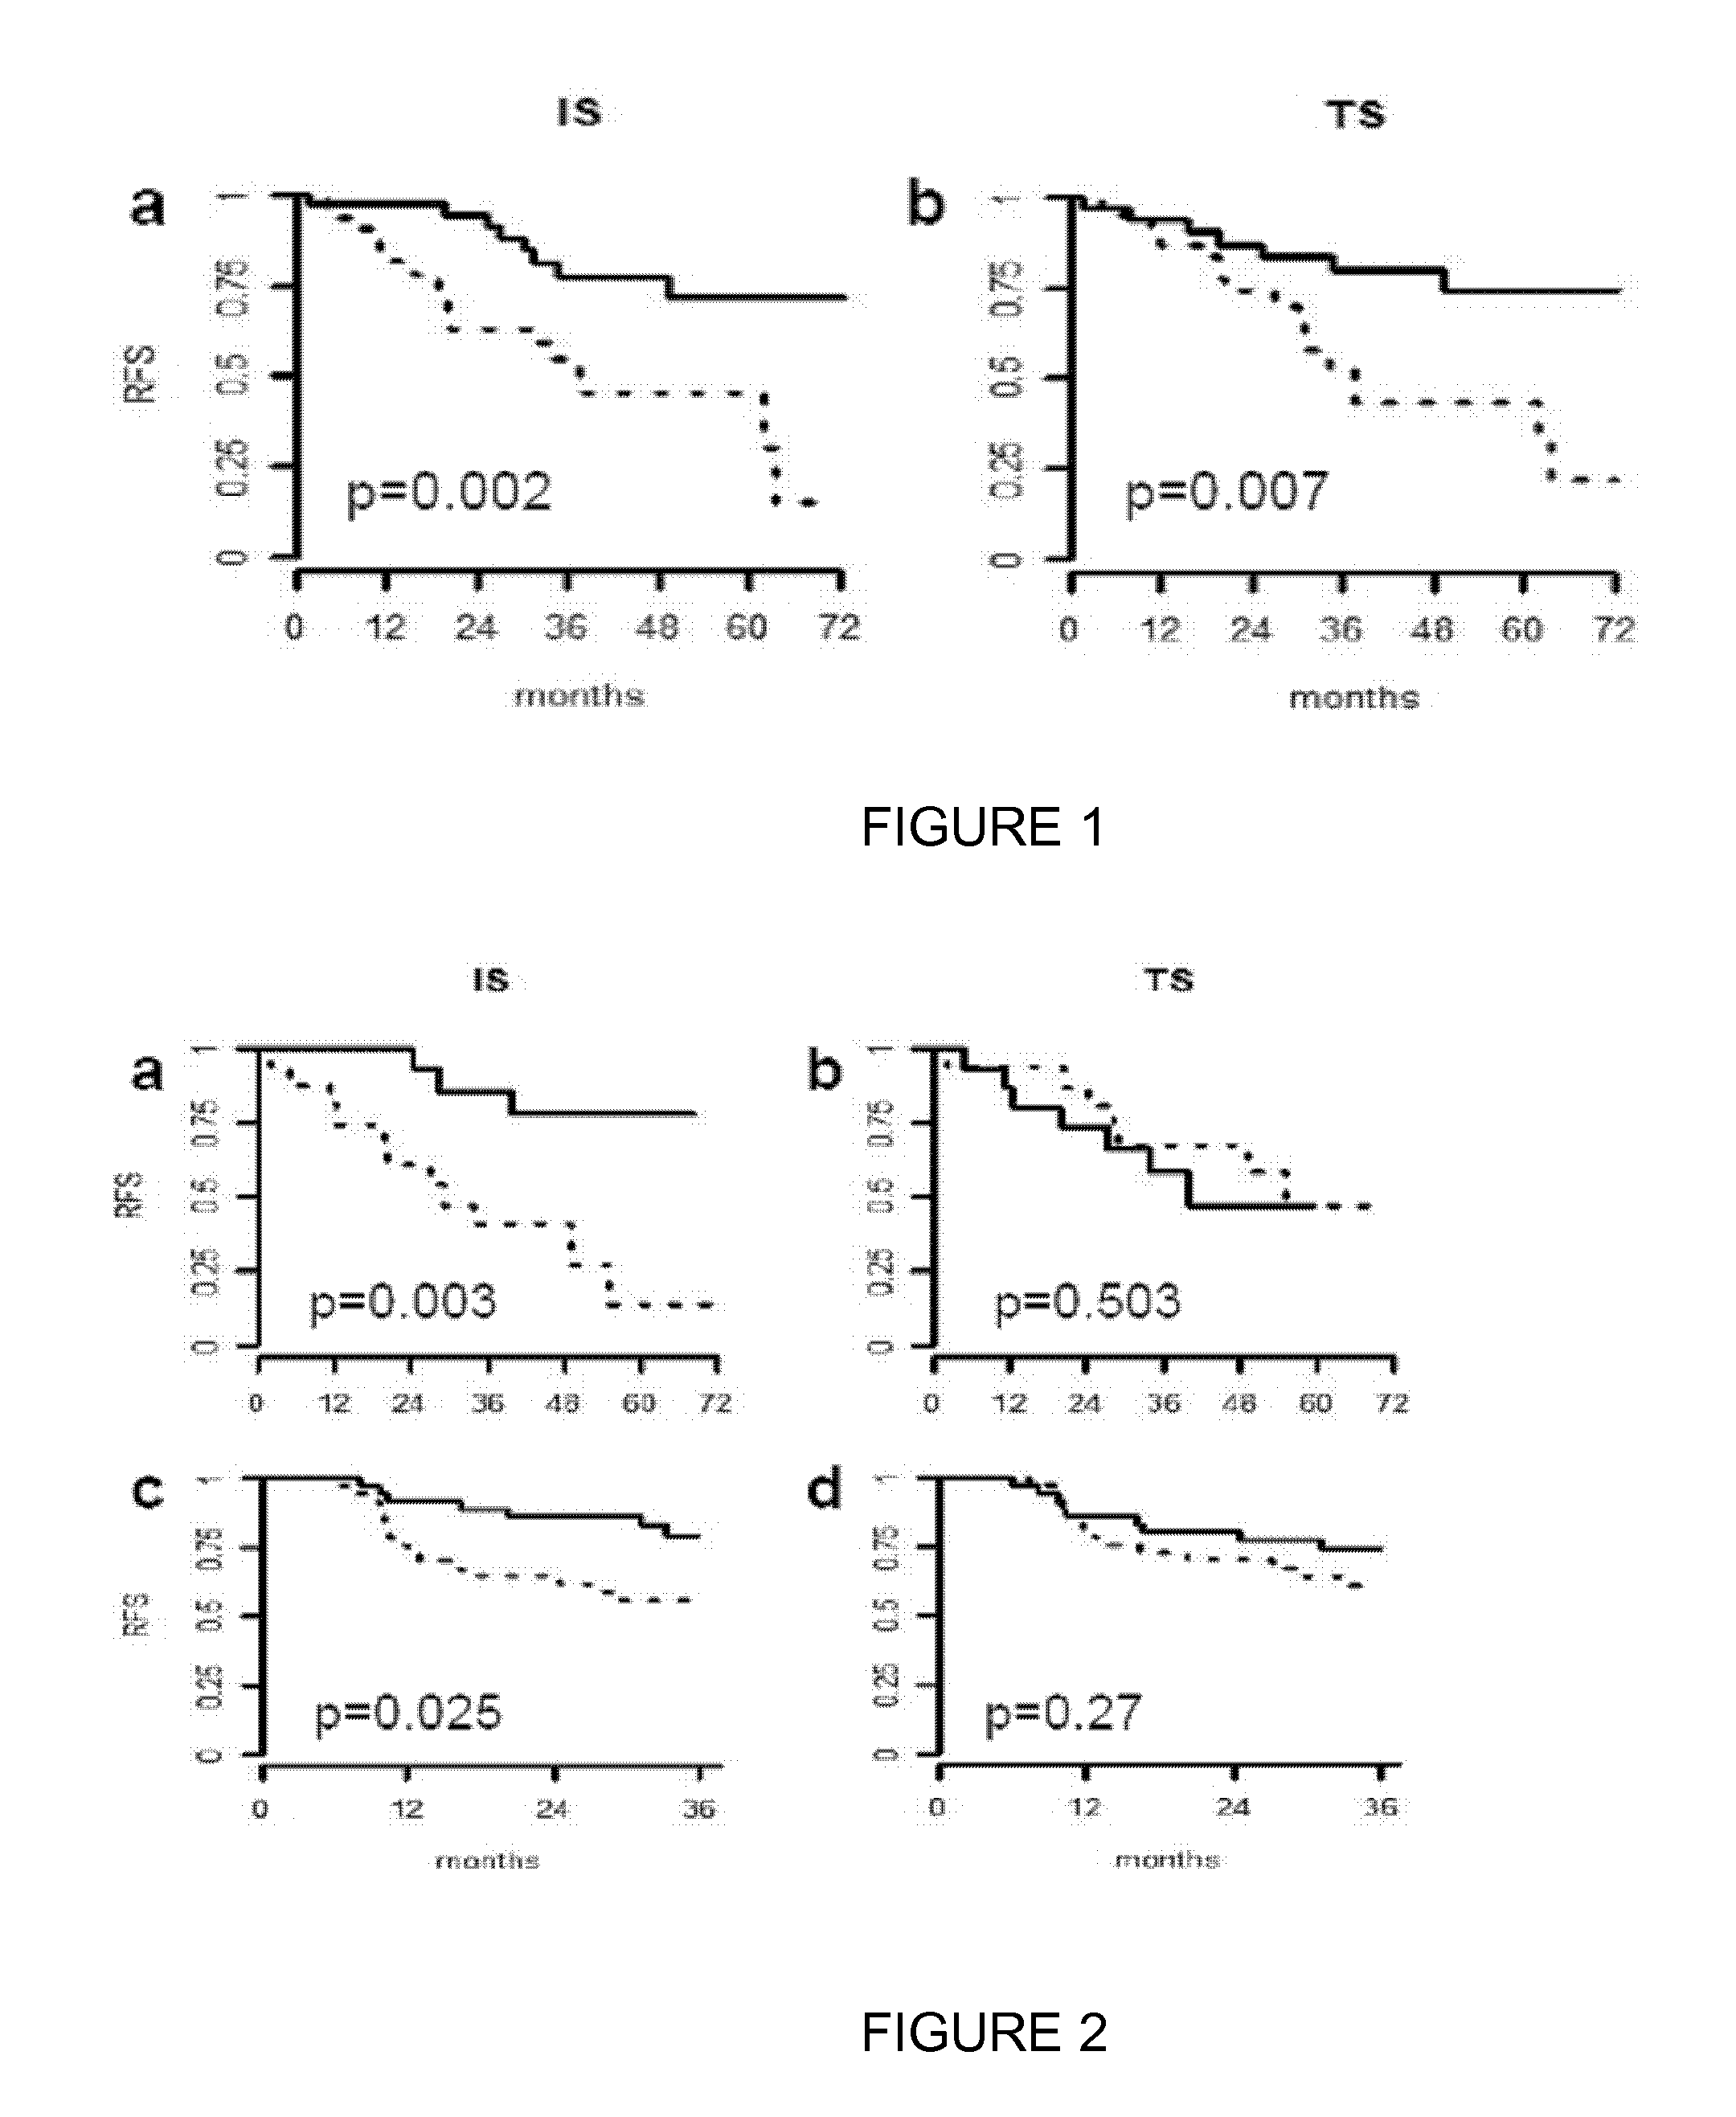 Method for Predicting Clinical Outcome of Patients With Non-Small Cell Lung Carcinoma